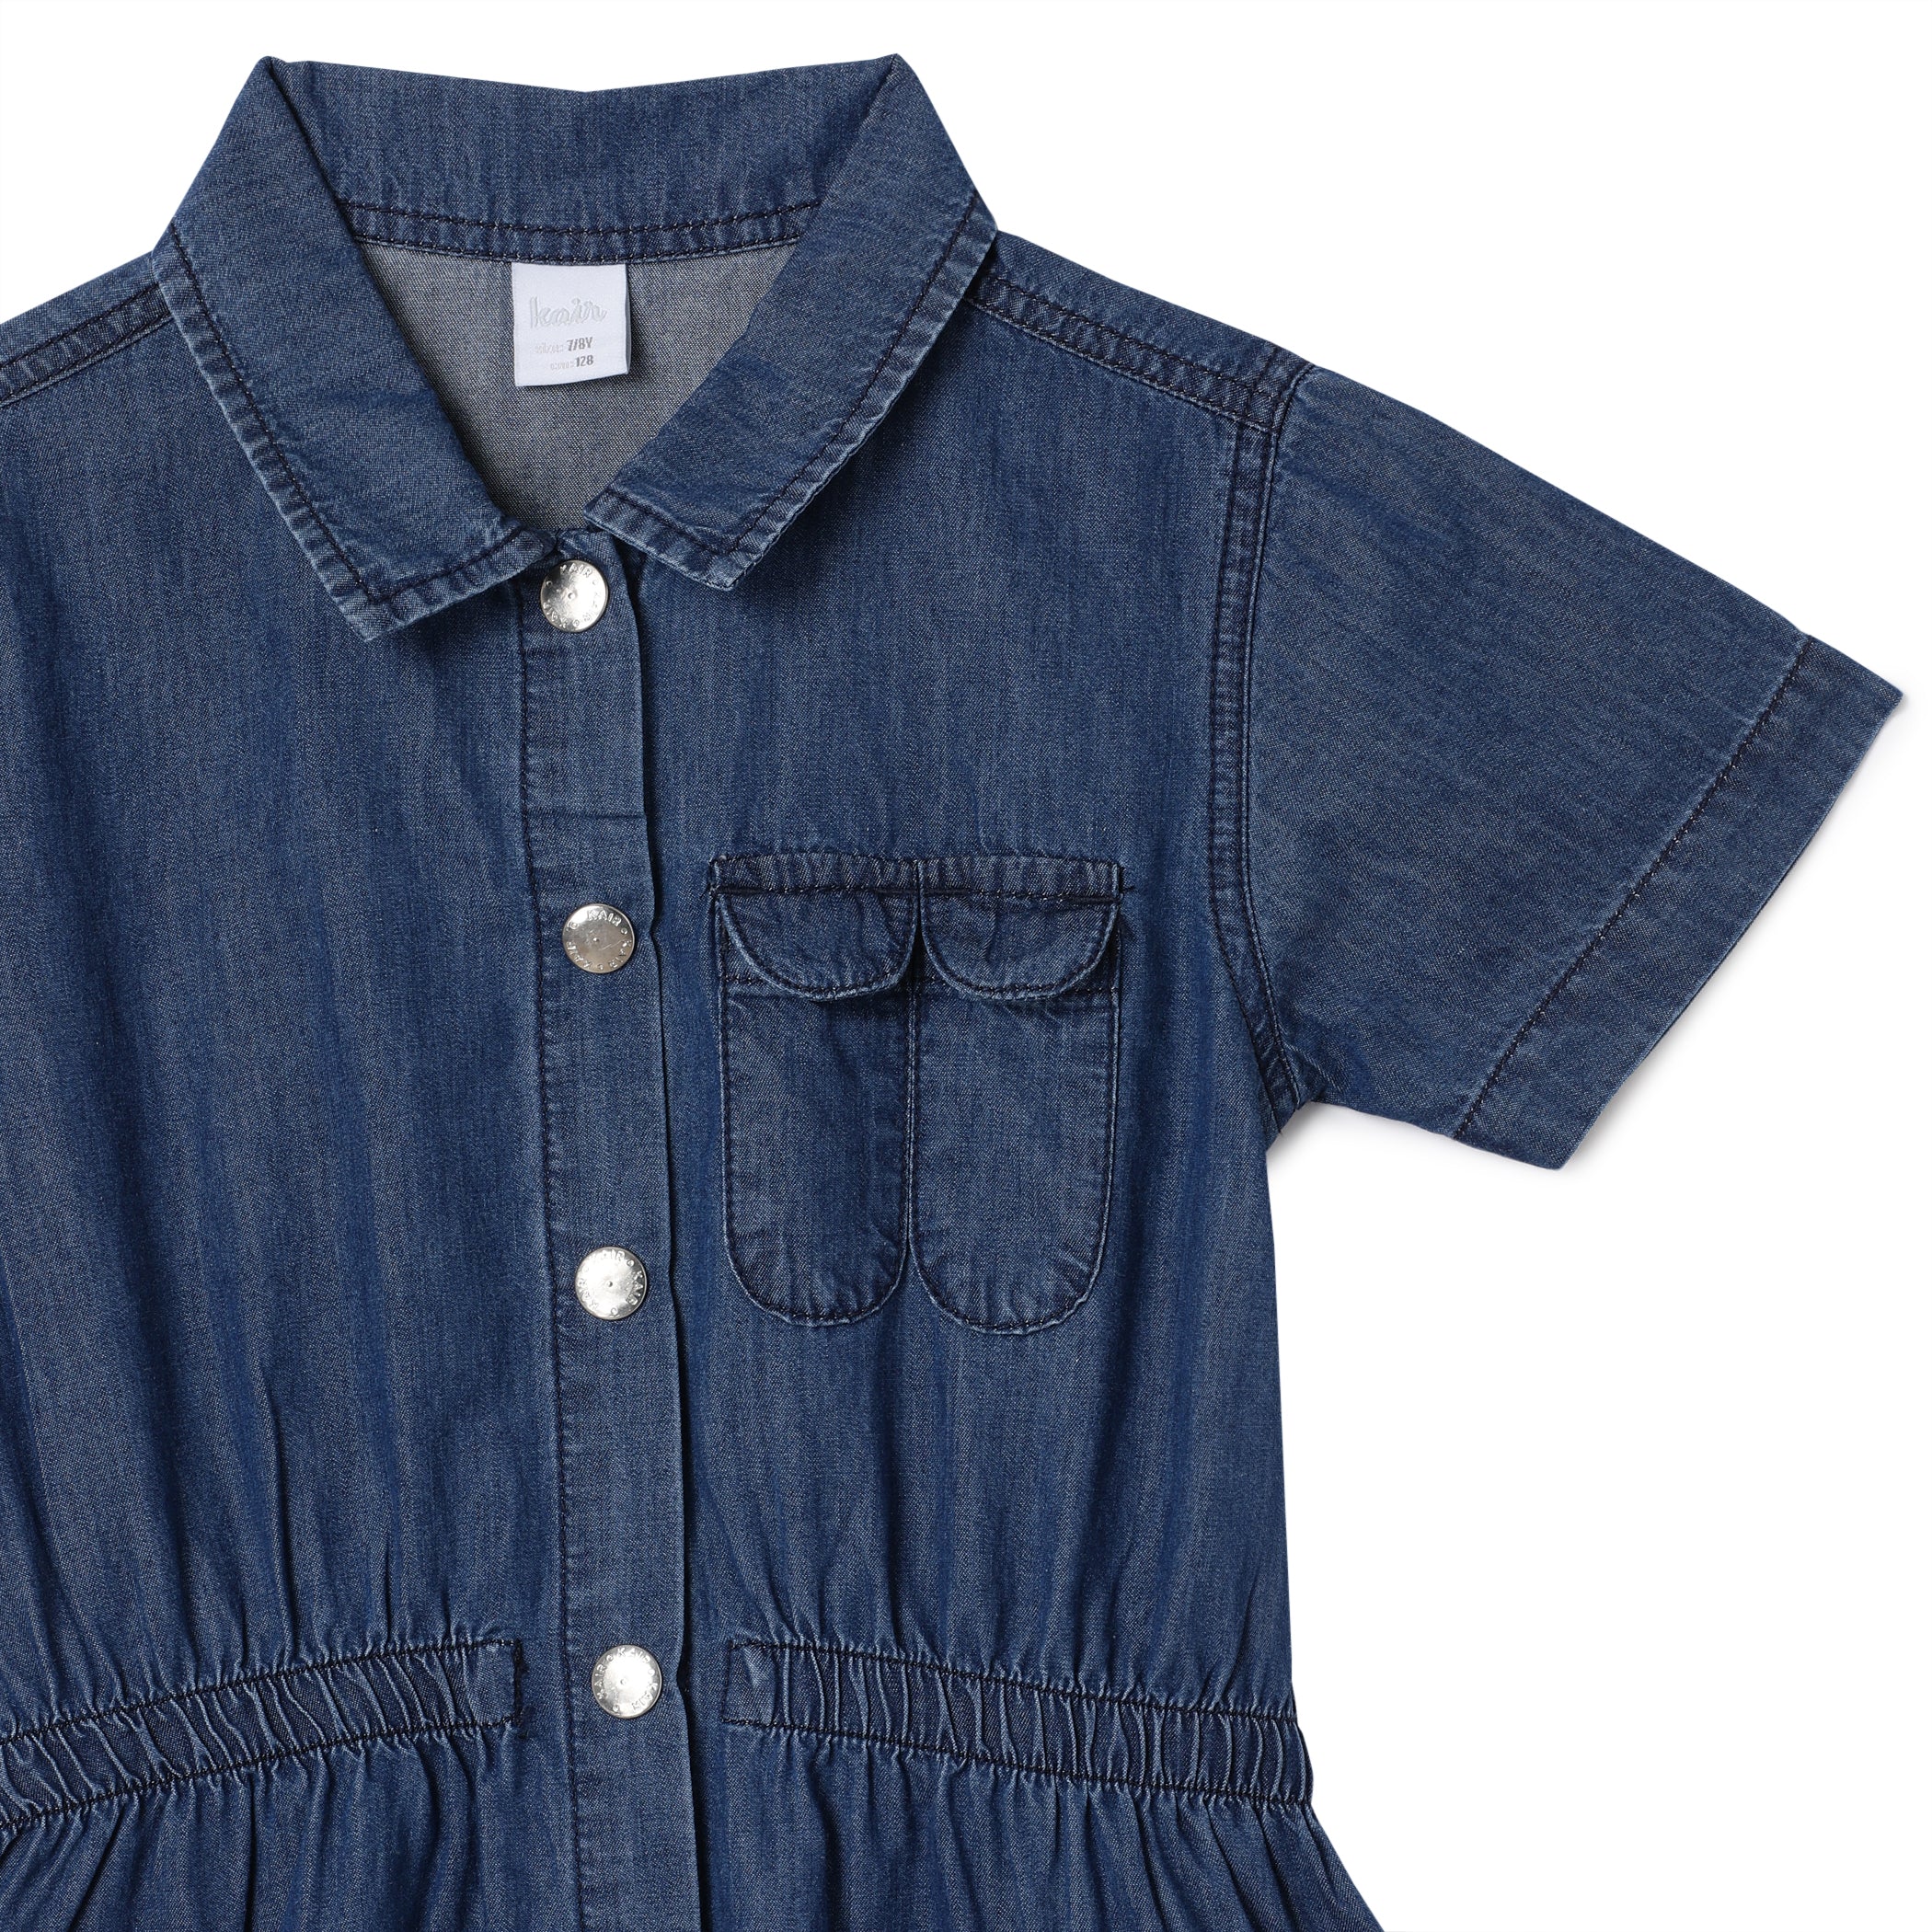 Buy MA&BABY Toddler Baby Girls Denim Dress One-Piece Long Sleeve Shirt  SkirtCasual Outfits Blue, 3T at Amazon.in